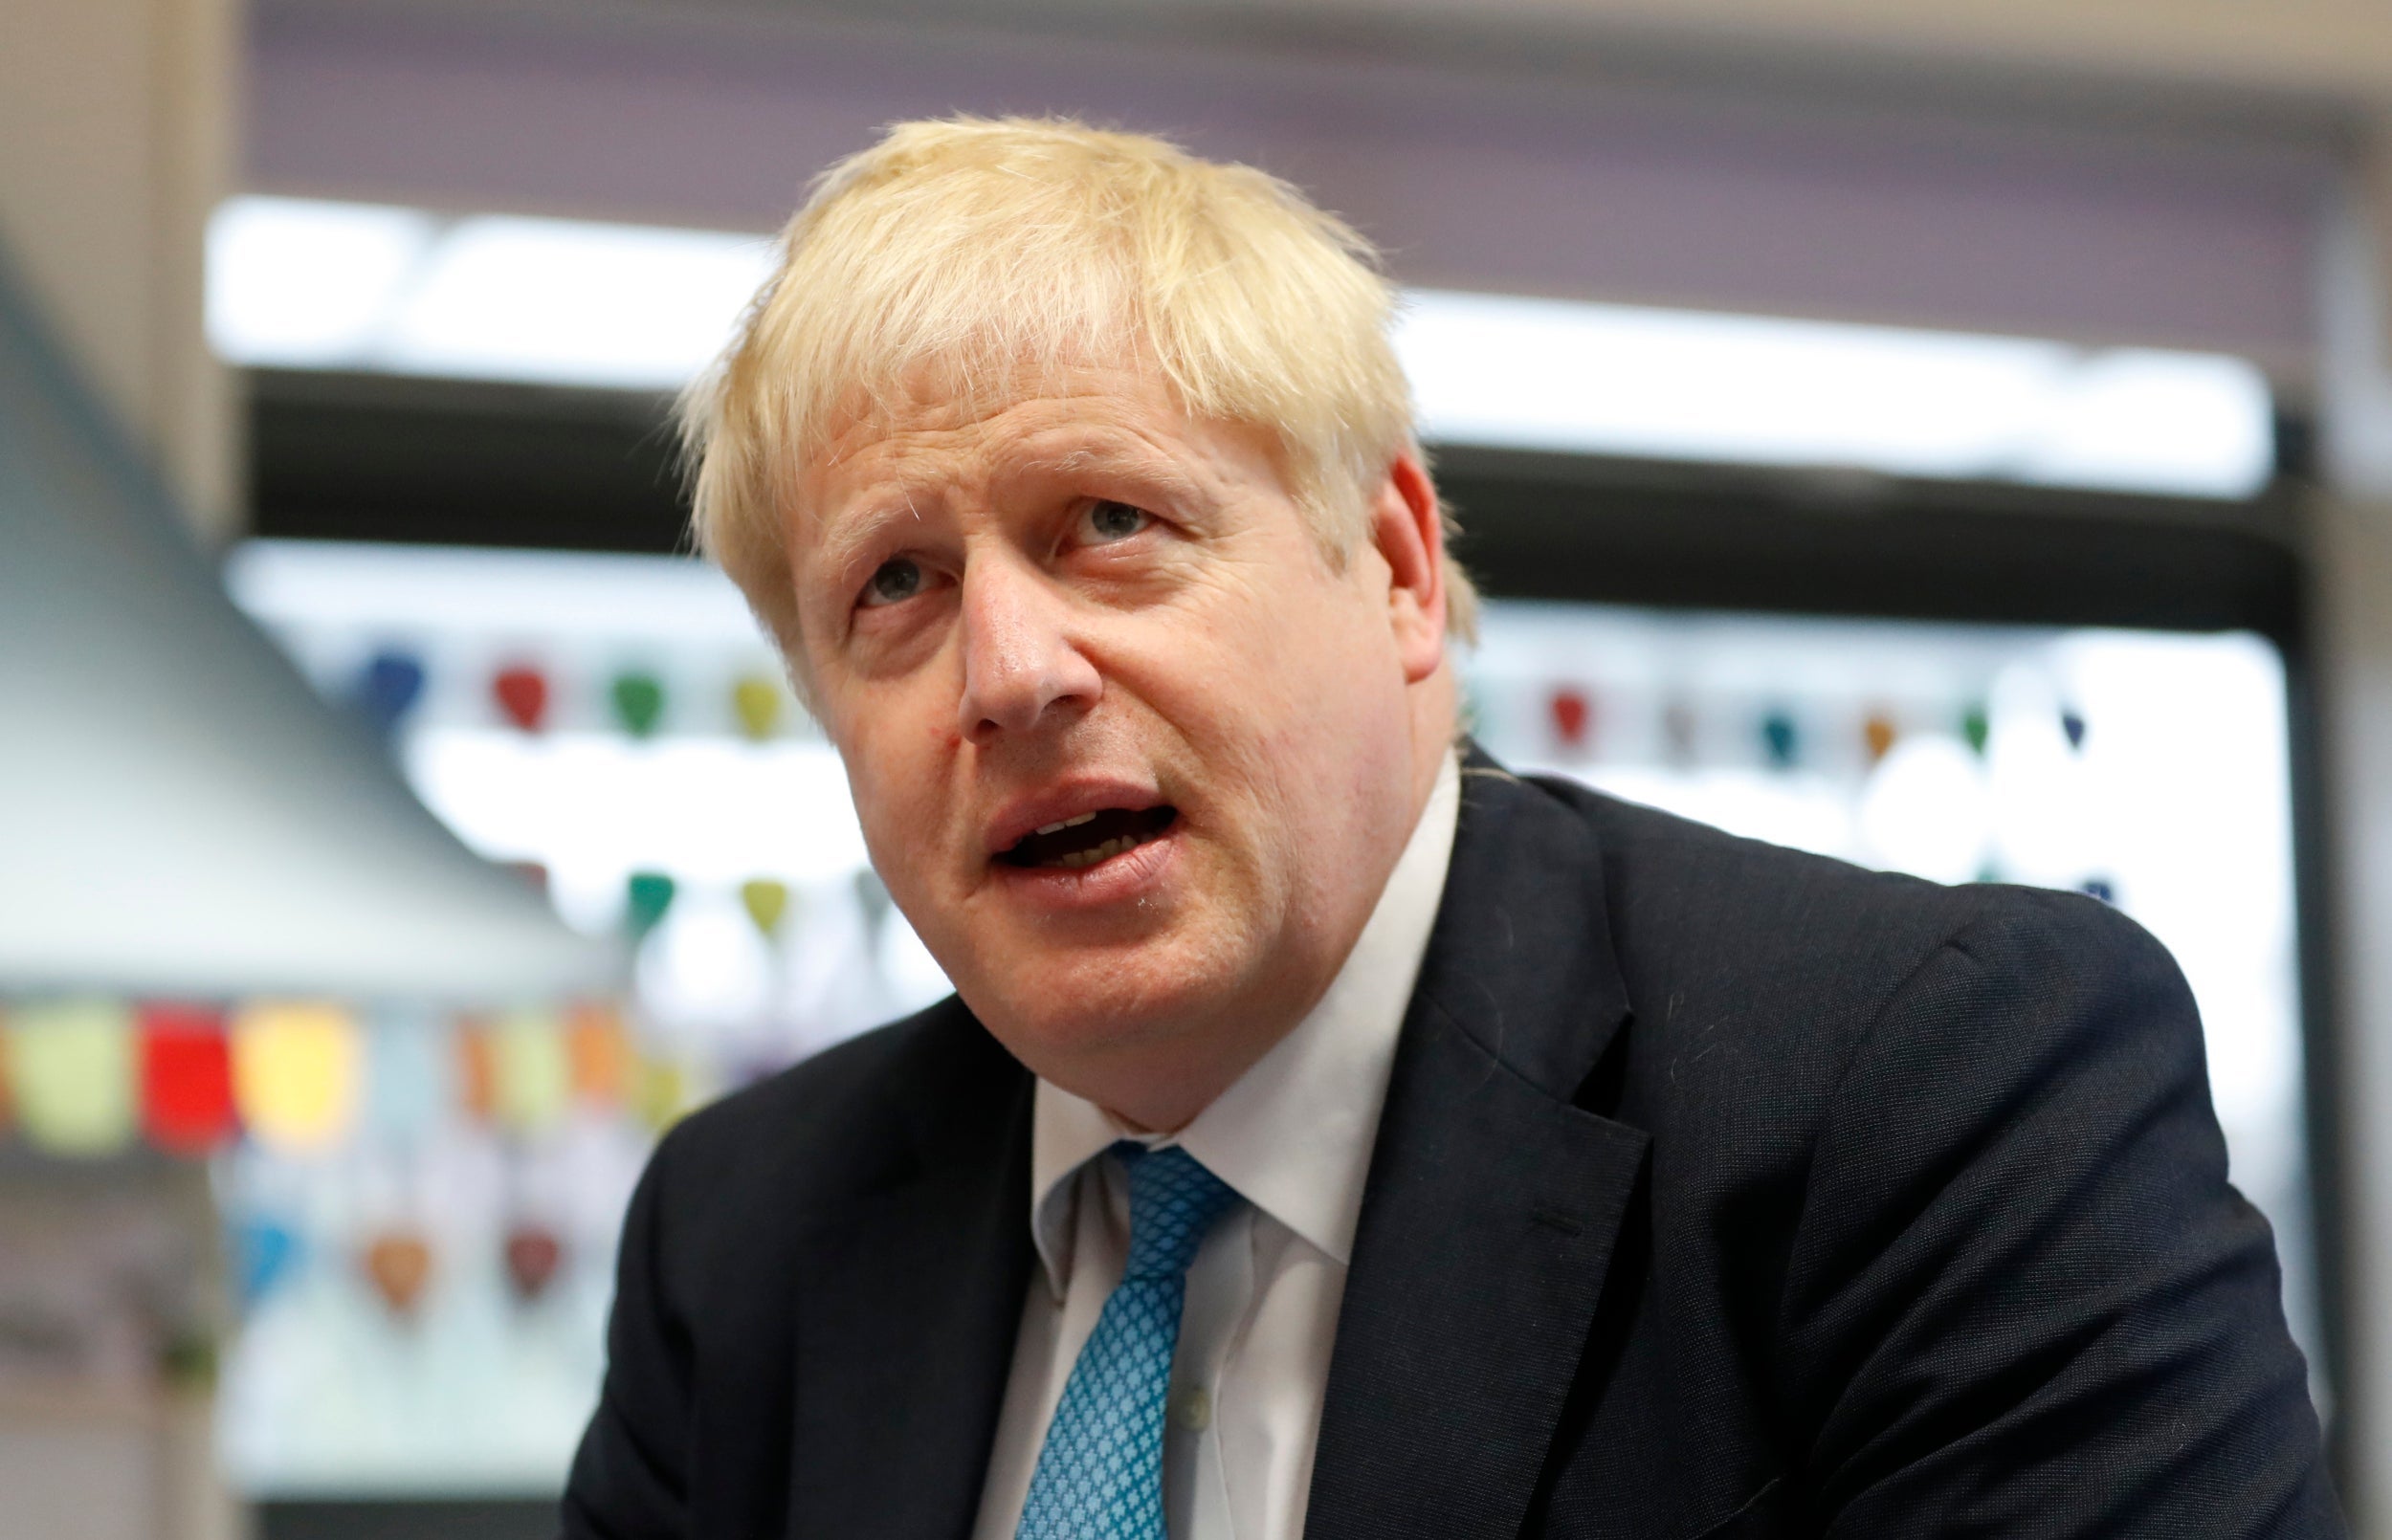 Boris Johnson has been accused of worsening the abuse of MPs